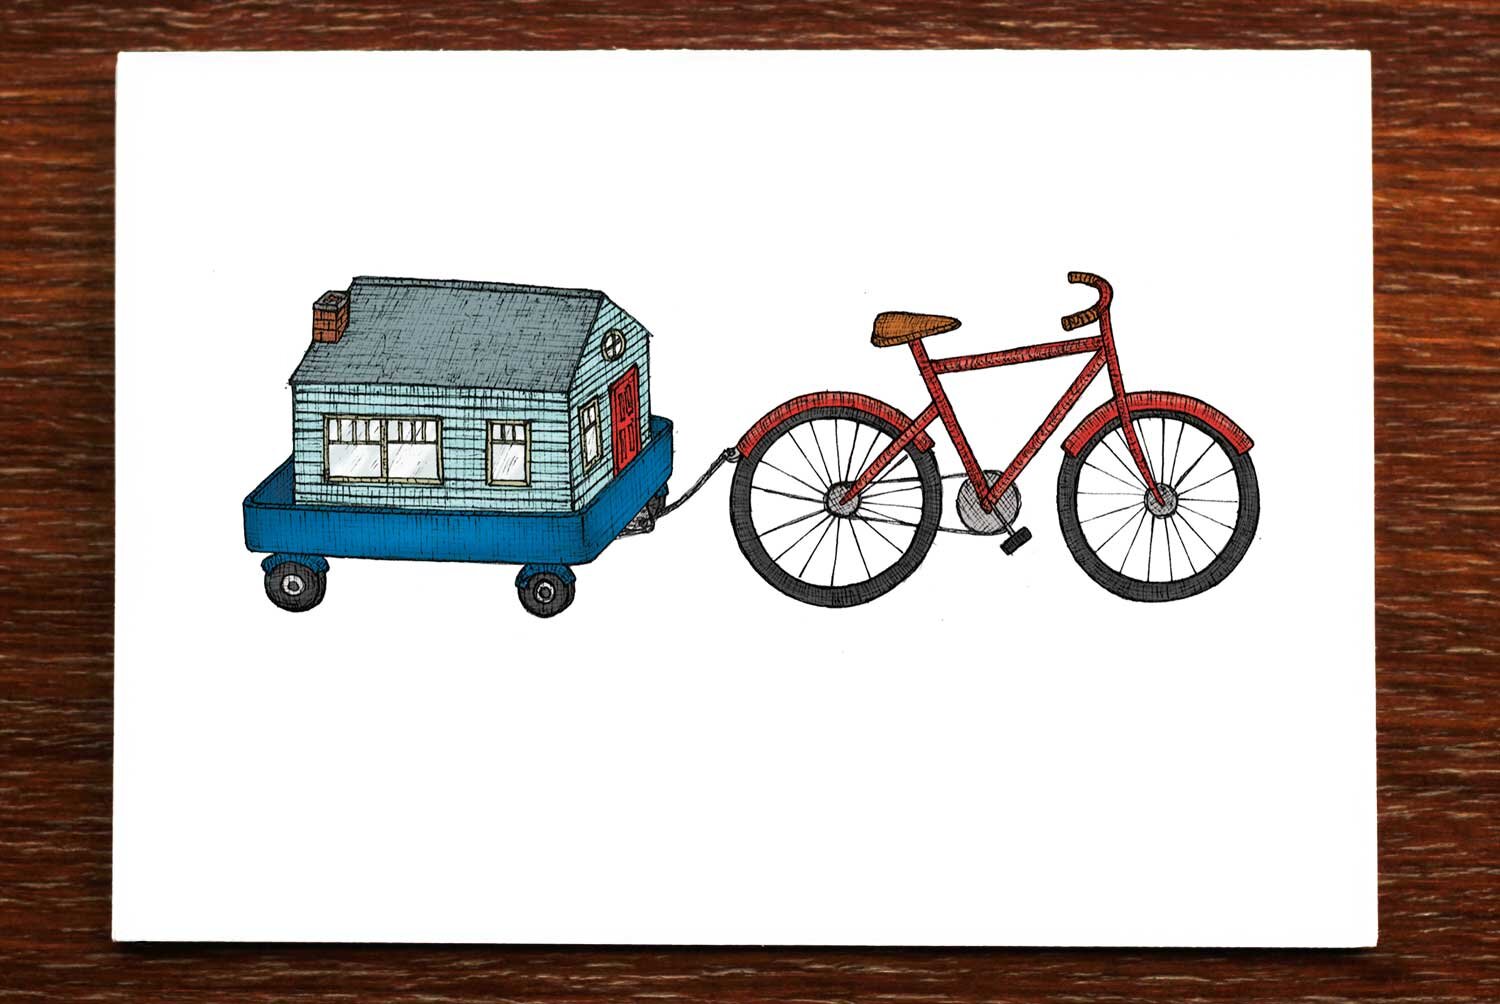 Home on a Bicycle - Greeting Card